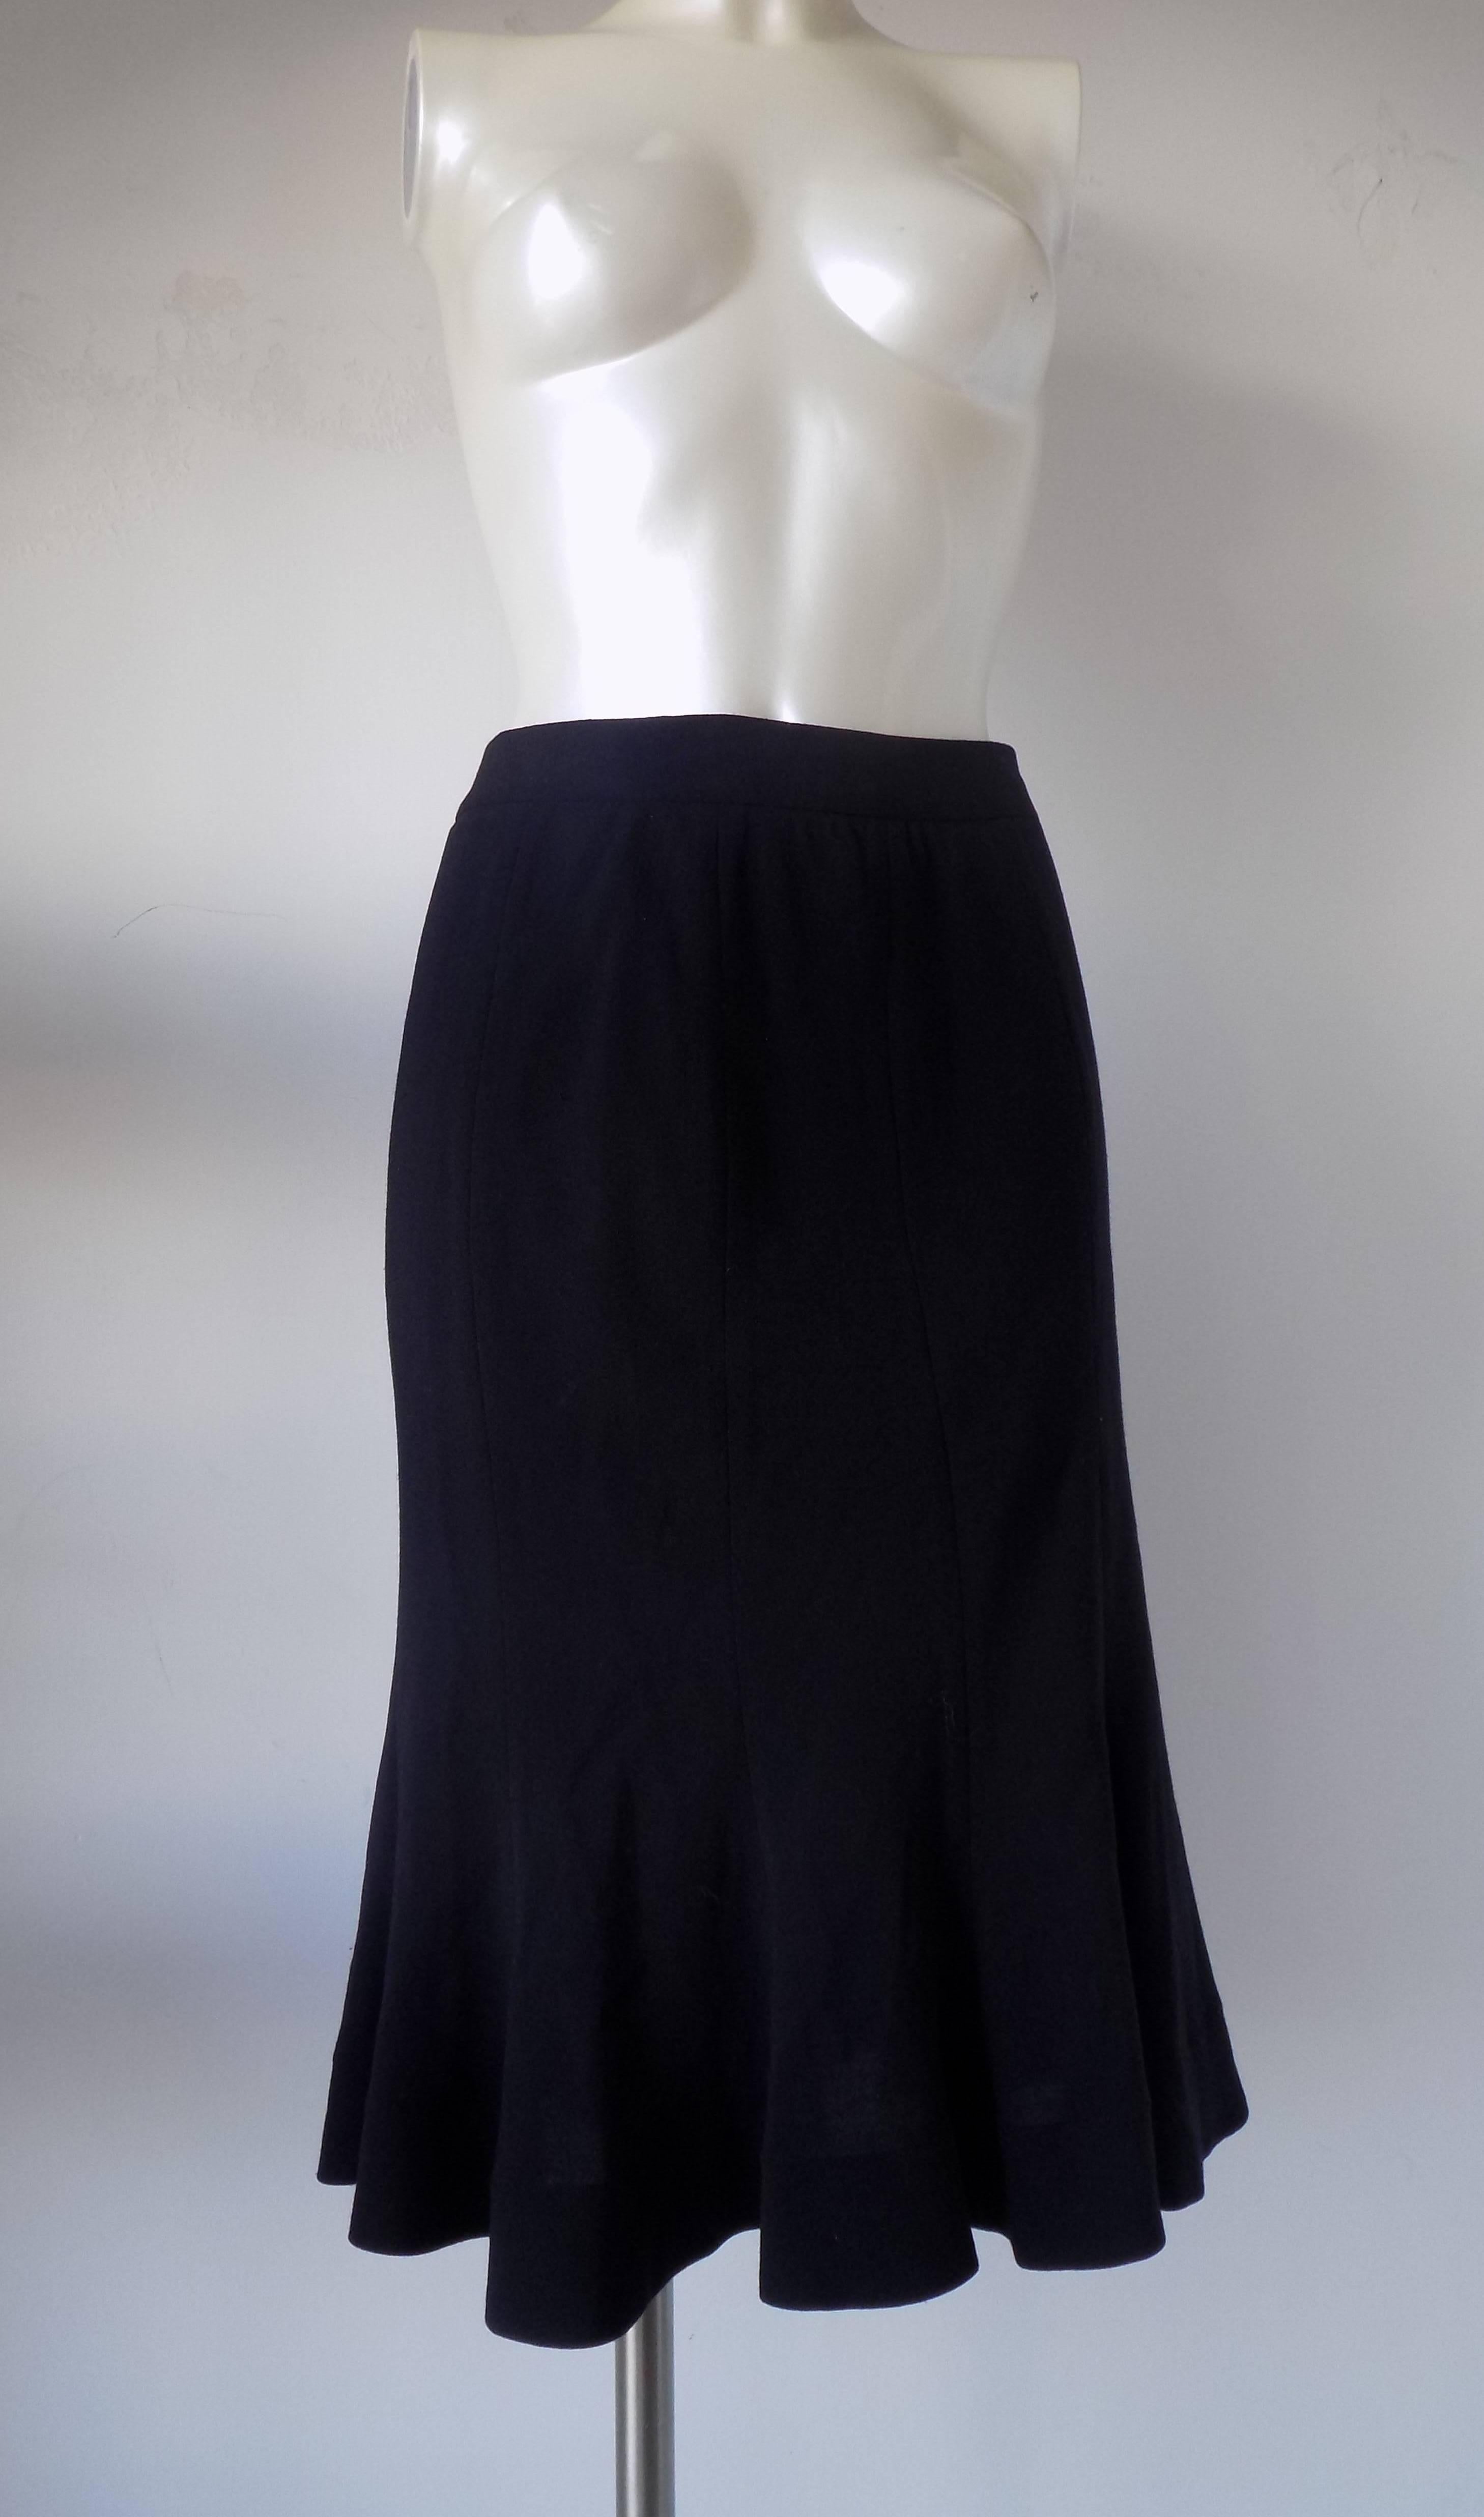 1990s Vivienne Westwood Anglomania black skirt NWOT 

Made in Italy

Size: 40 italian size range

Composition: 53 poliester 43 wool 4 elastan